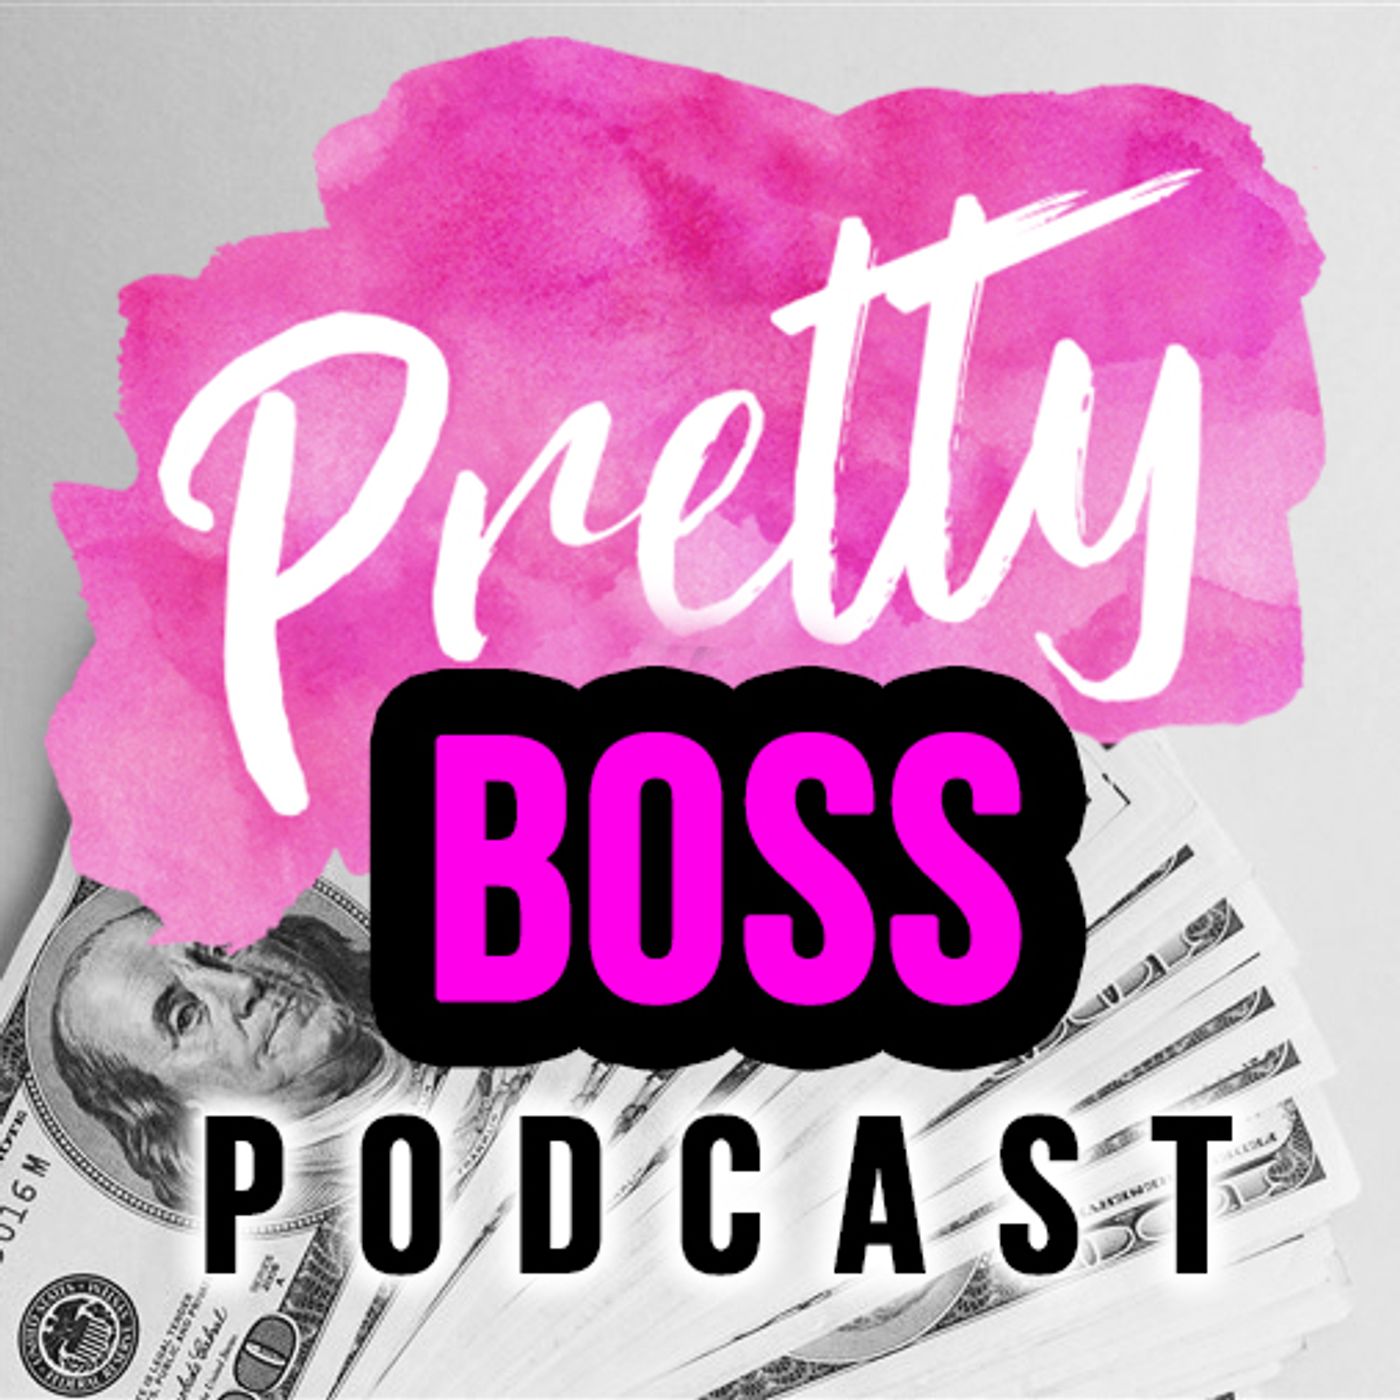 "How To Not Be Gimmicky" Pretty Boss Podcast E6